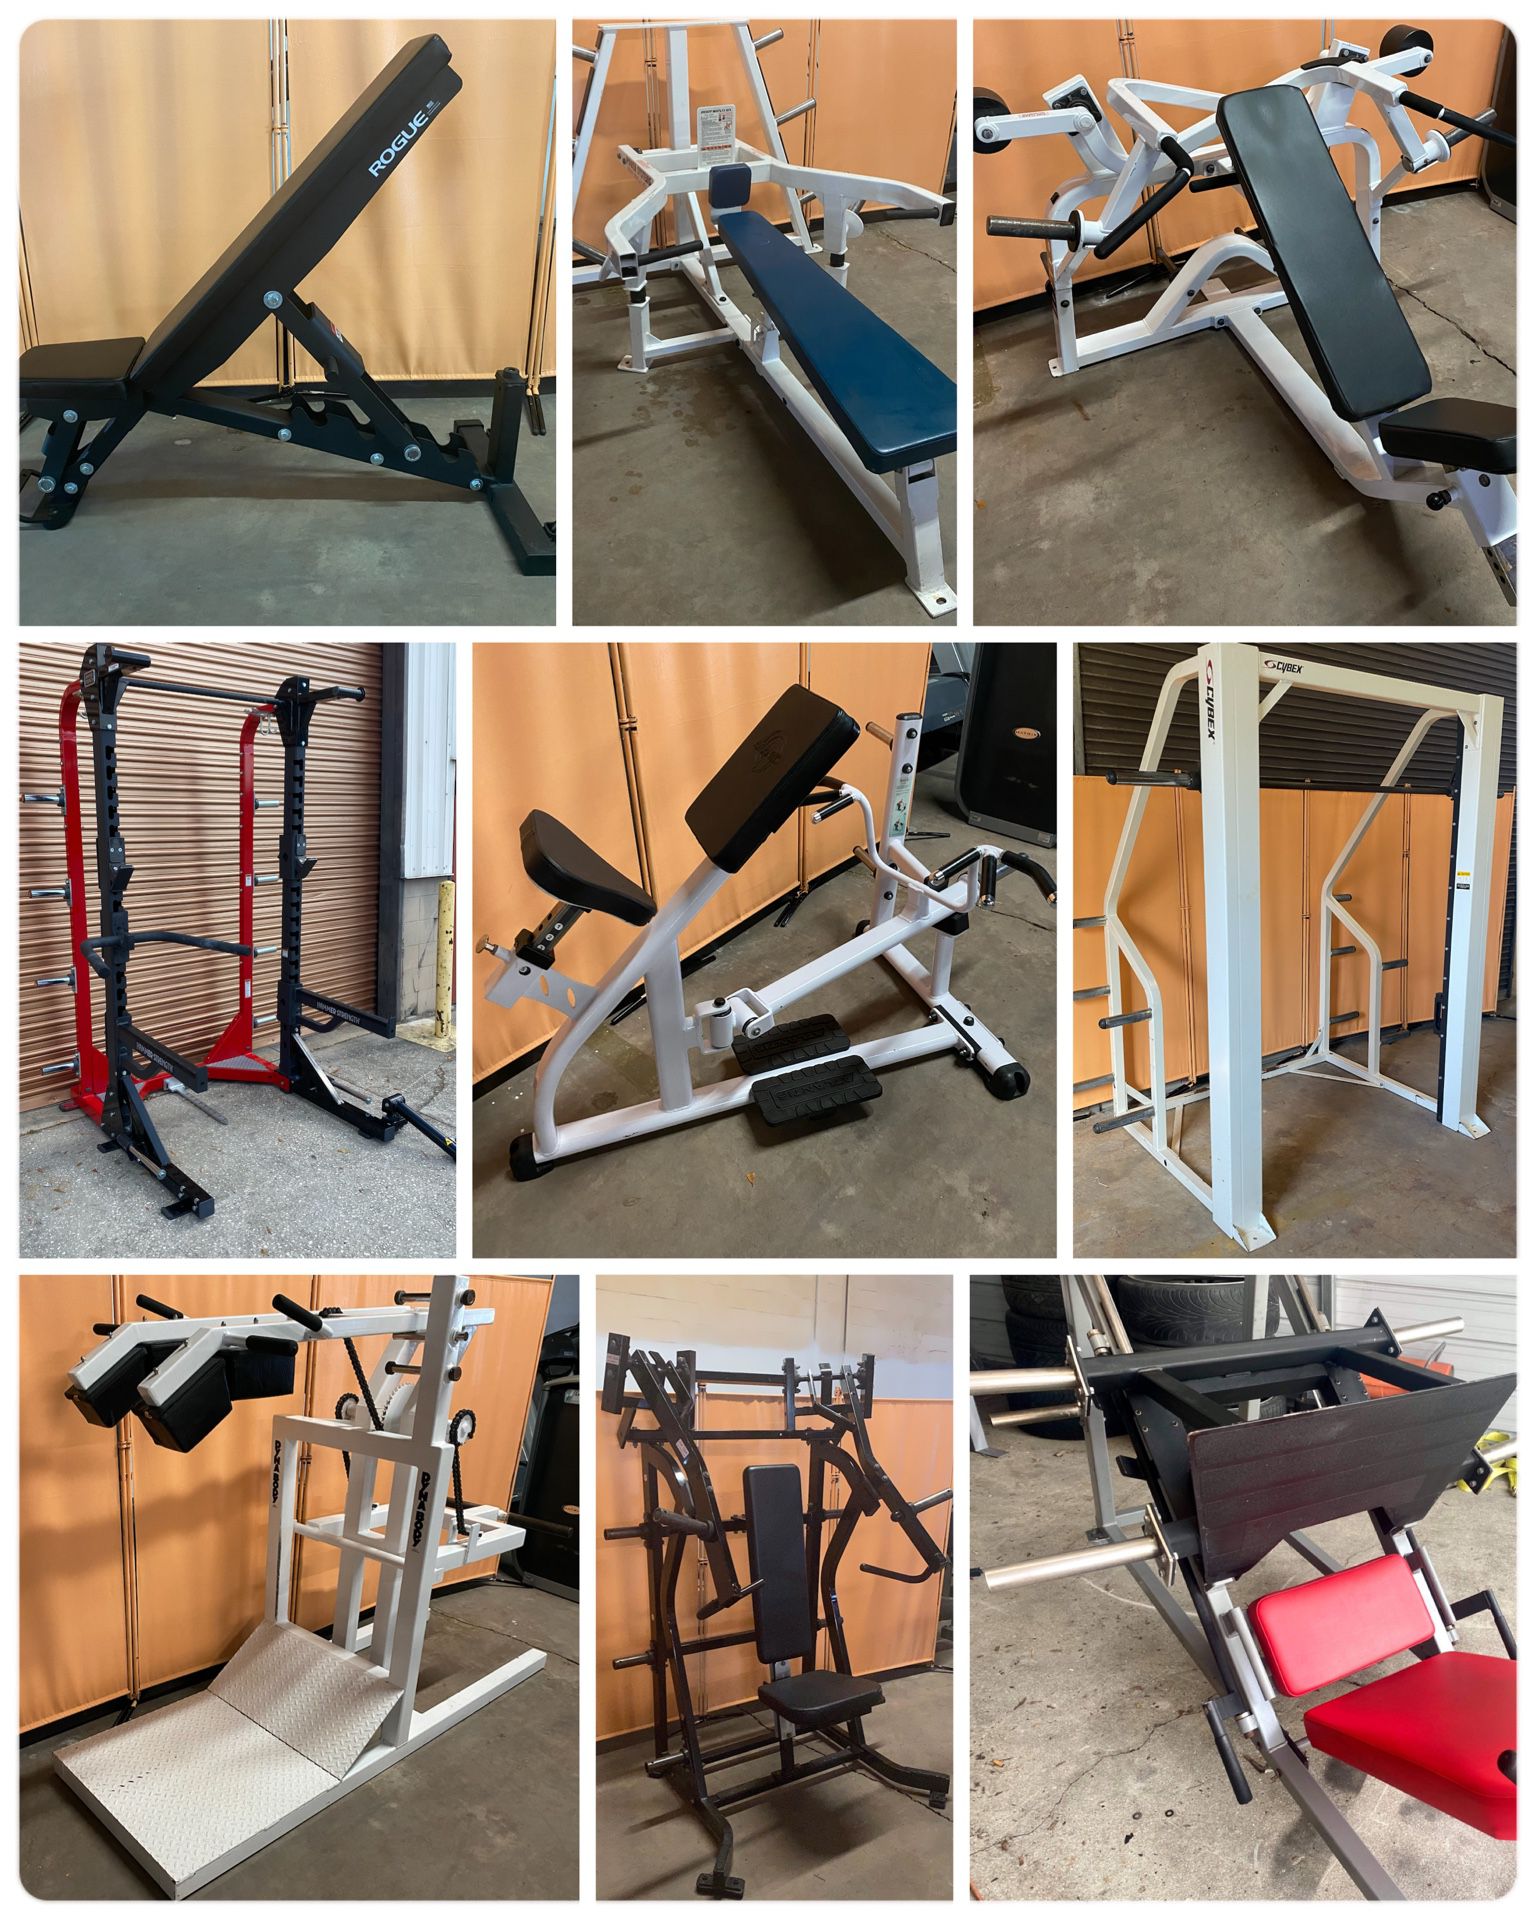 Gym Equipment, Olympic Weight Plate Bench, Chest, Smith Machines Home Leg Press Dumbbell Rack Power Squat Curl Extension Bar